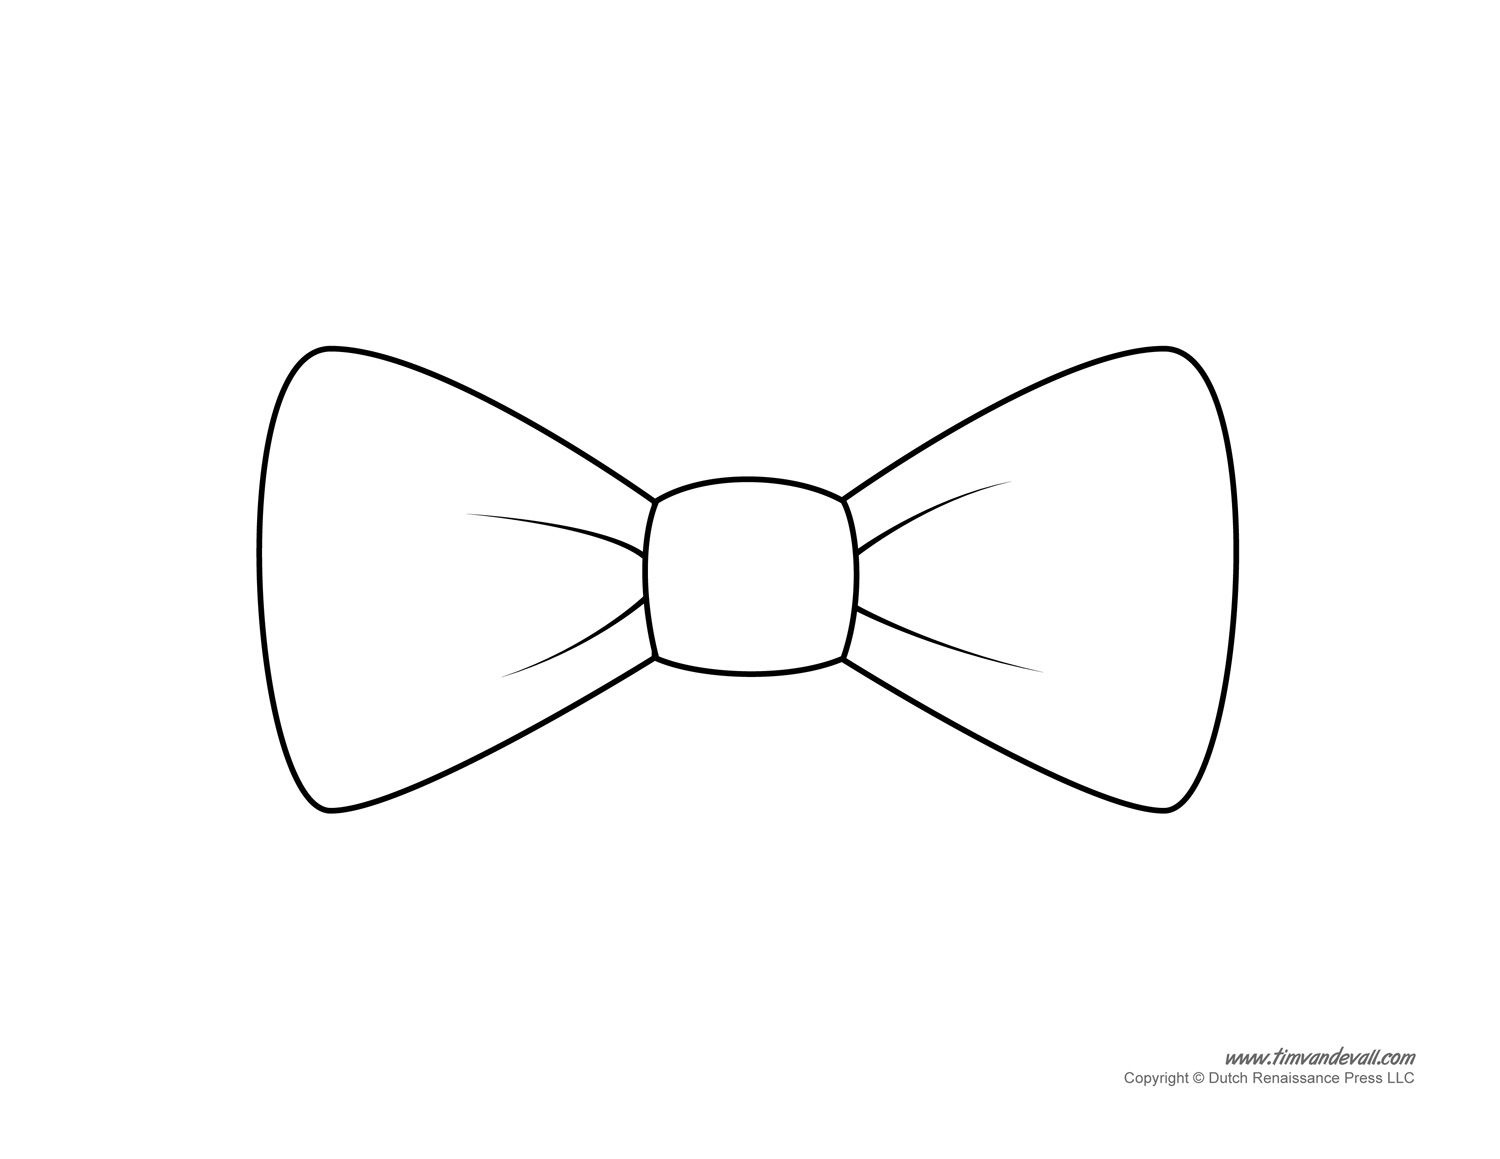 Bow Tie Drawing | Paper Bow Tie Templates |Bow Tie Printables - Free Printable Tie Template